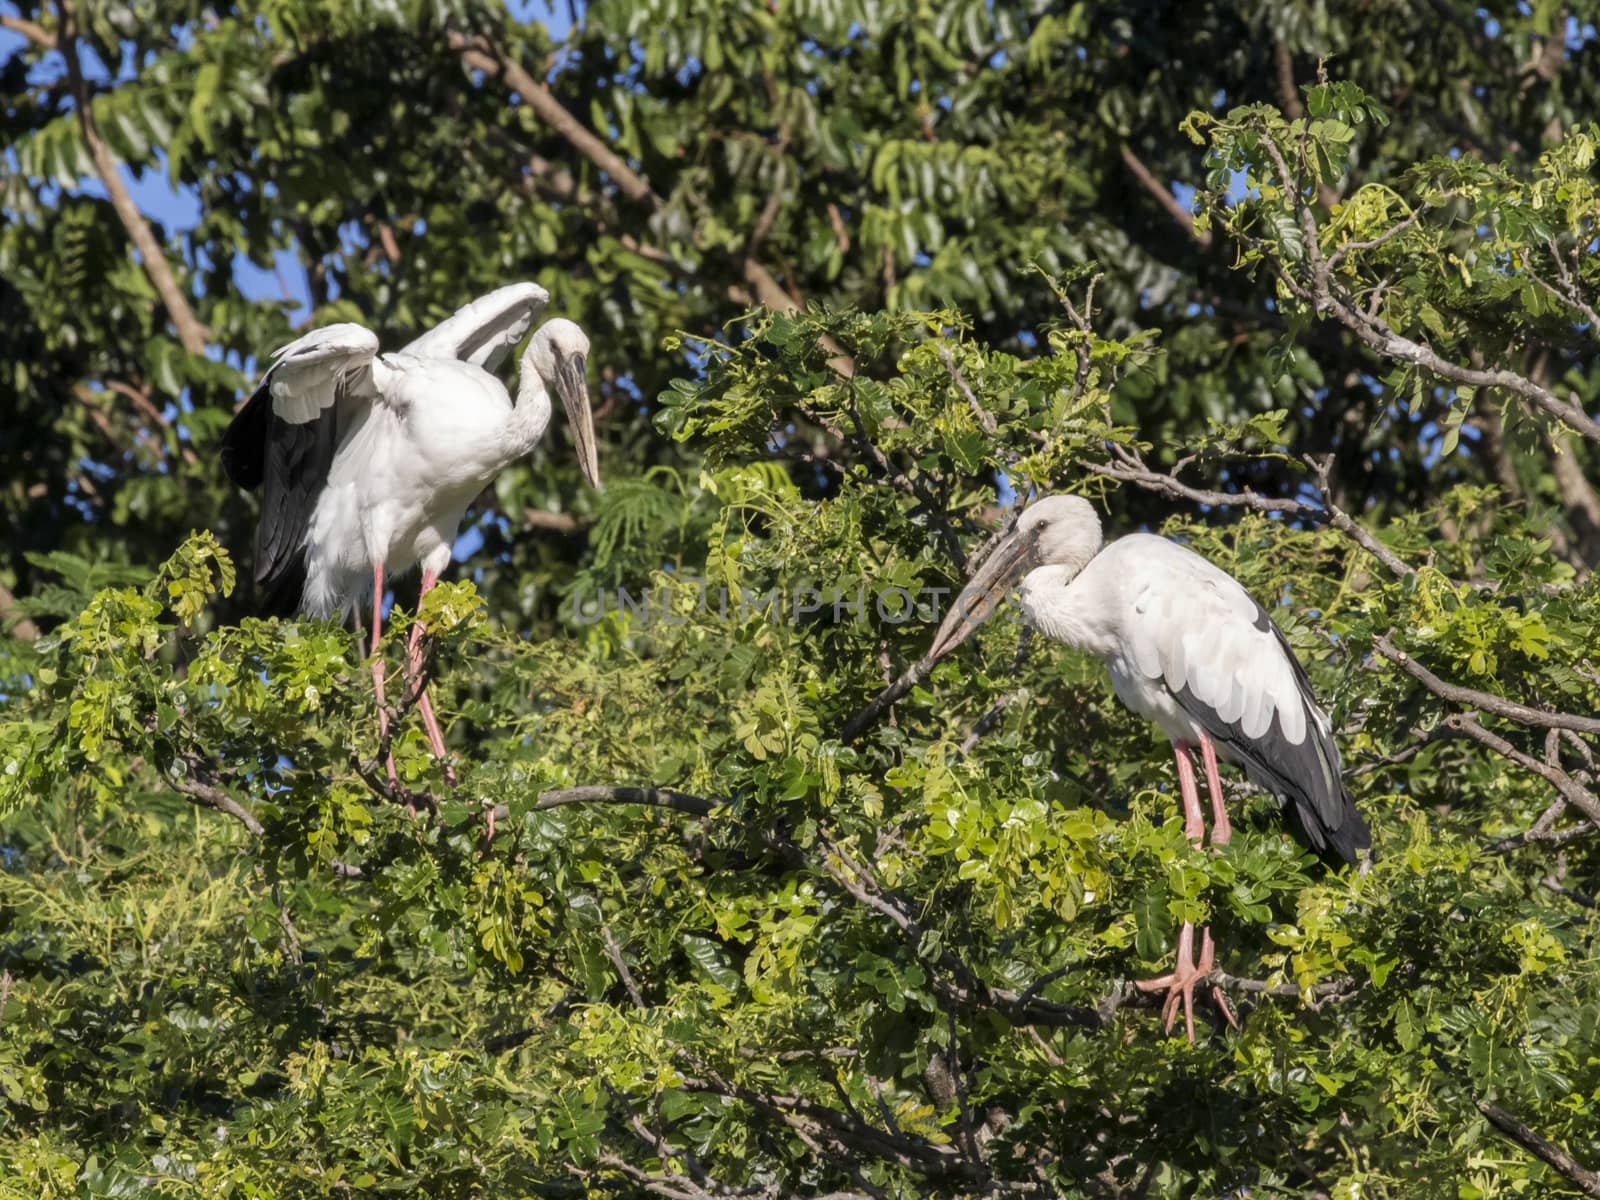 Image of stork perched on tree branch. by yod67